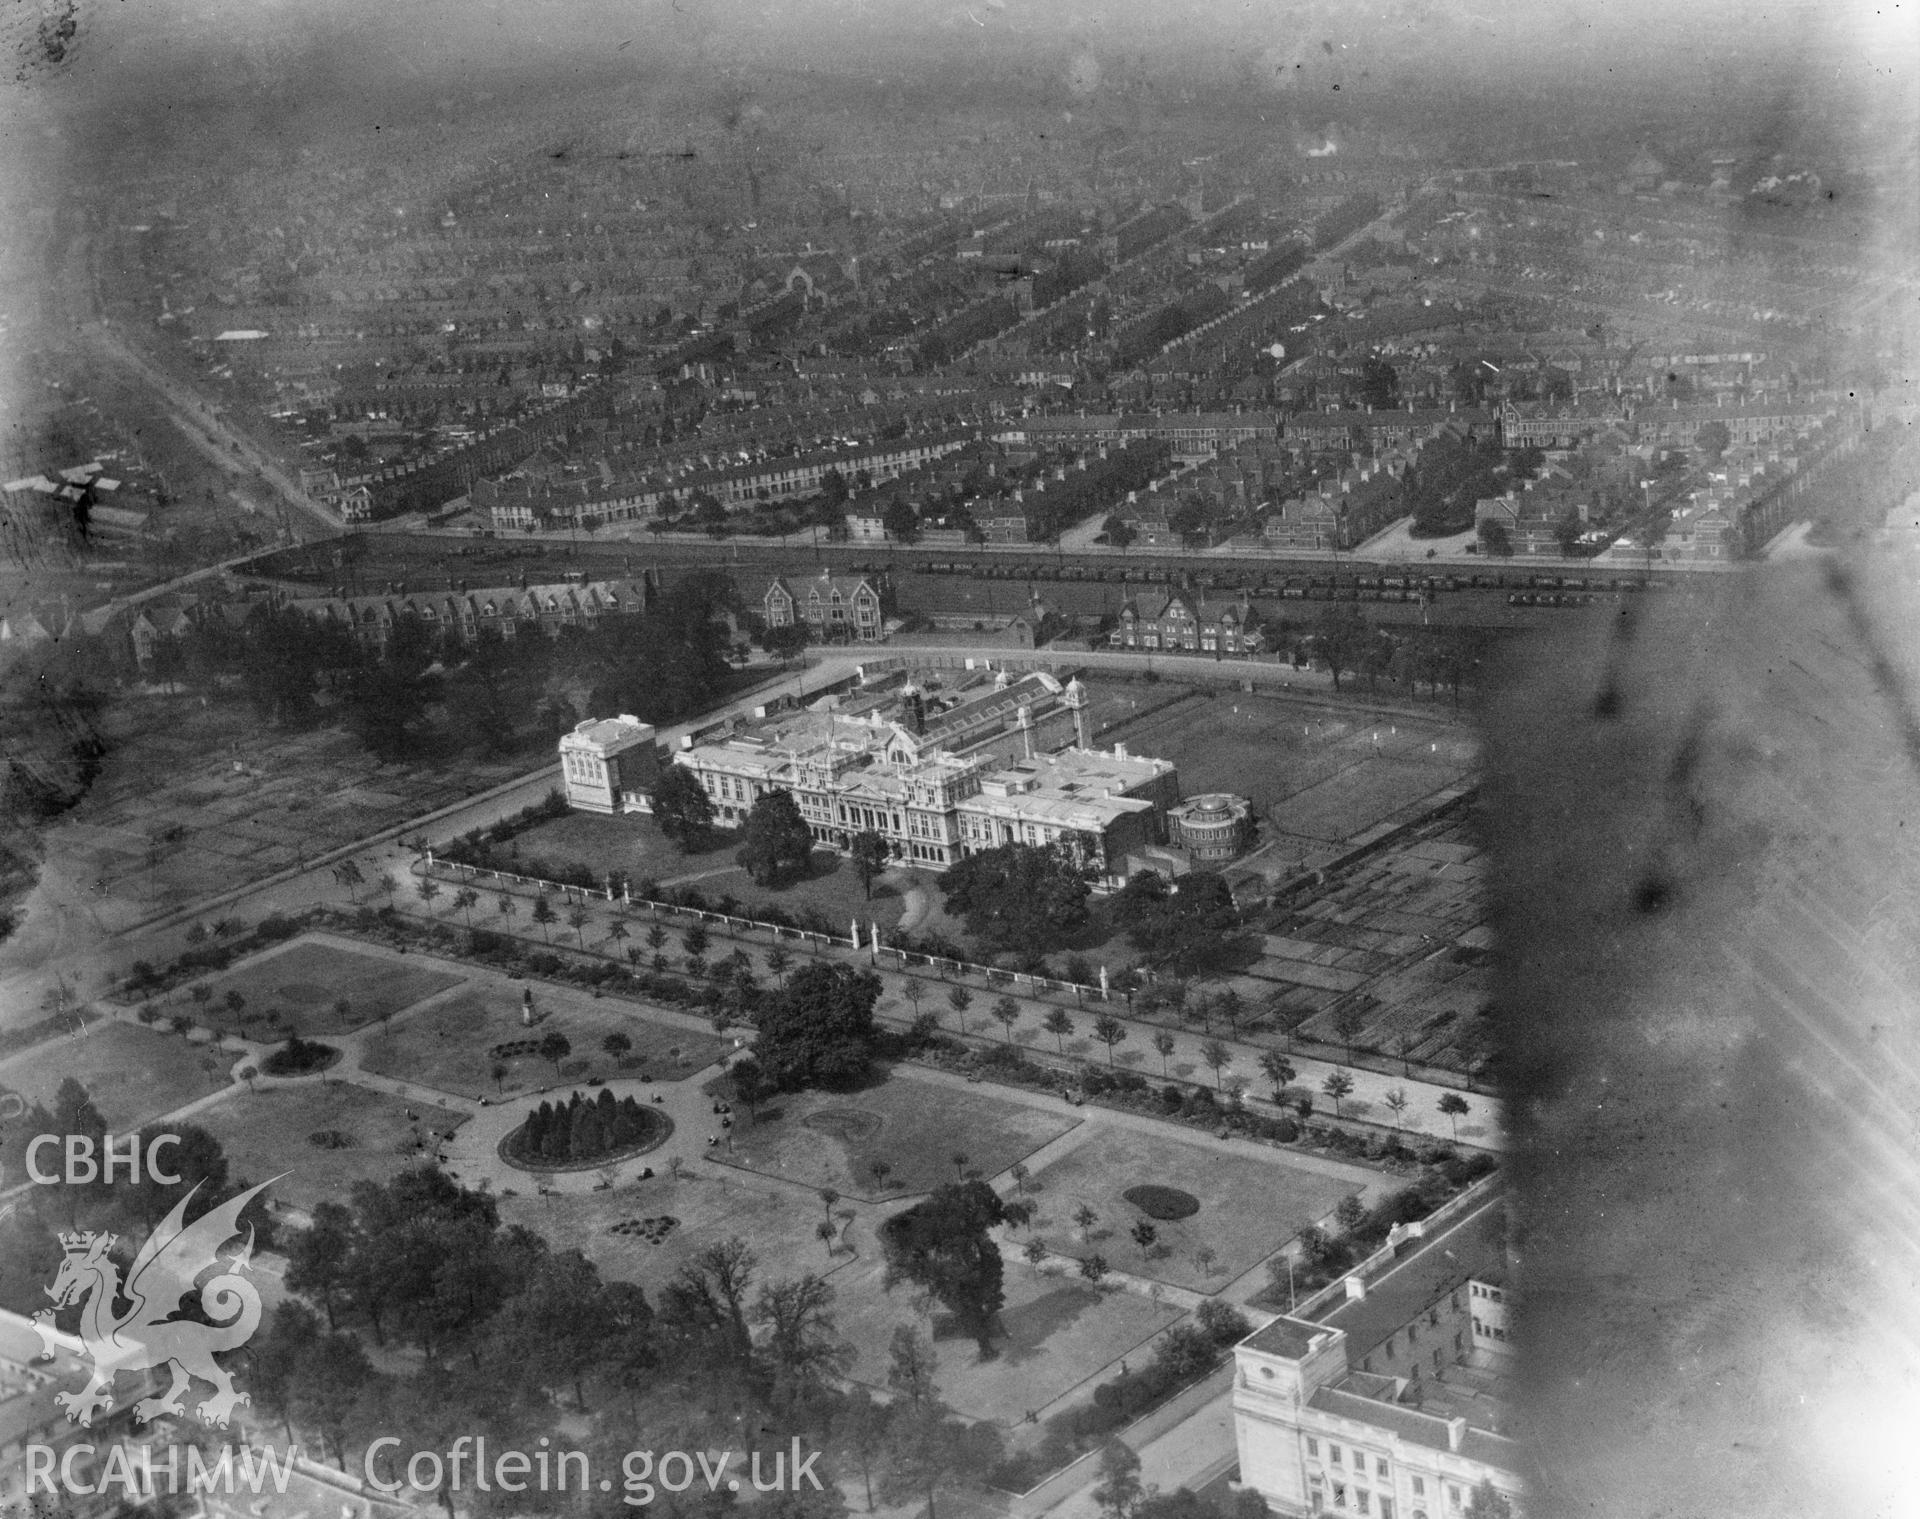 View of Cathays Park, Cardiff, showing University buildings, oblique aerial view. 5?x4? black and white glass plate negative.